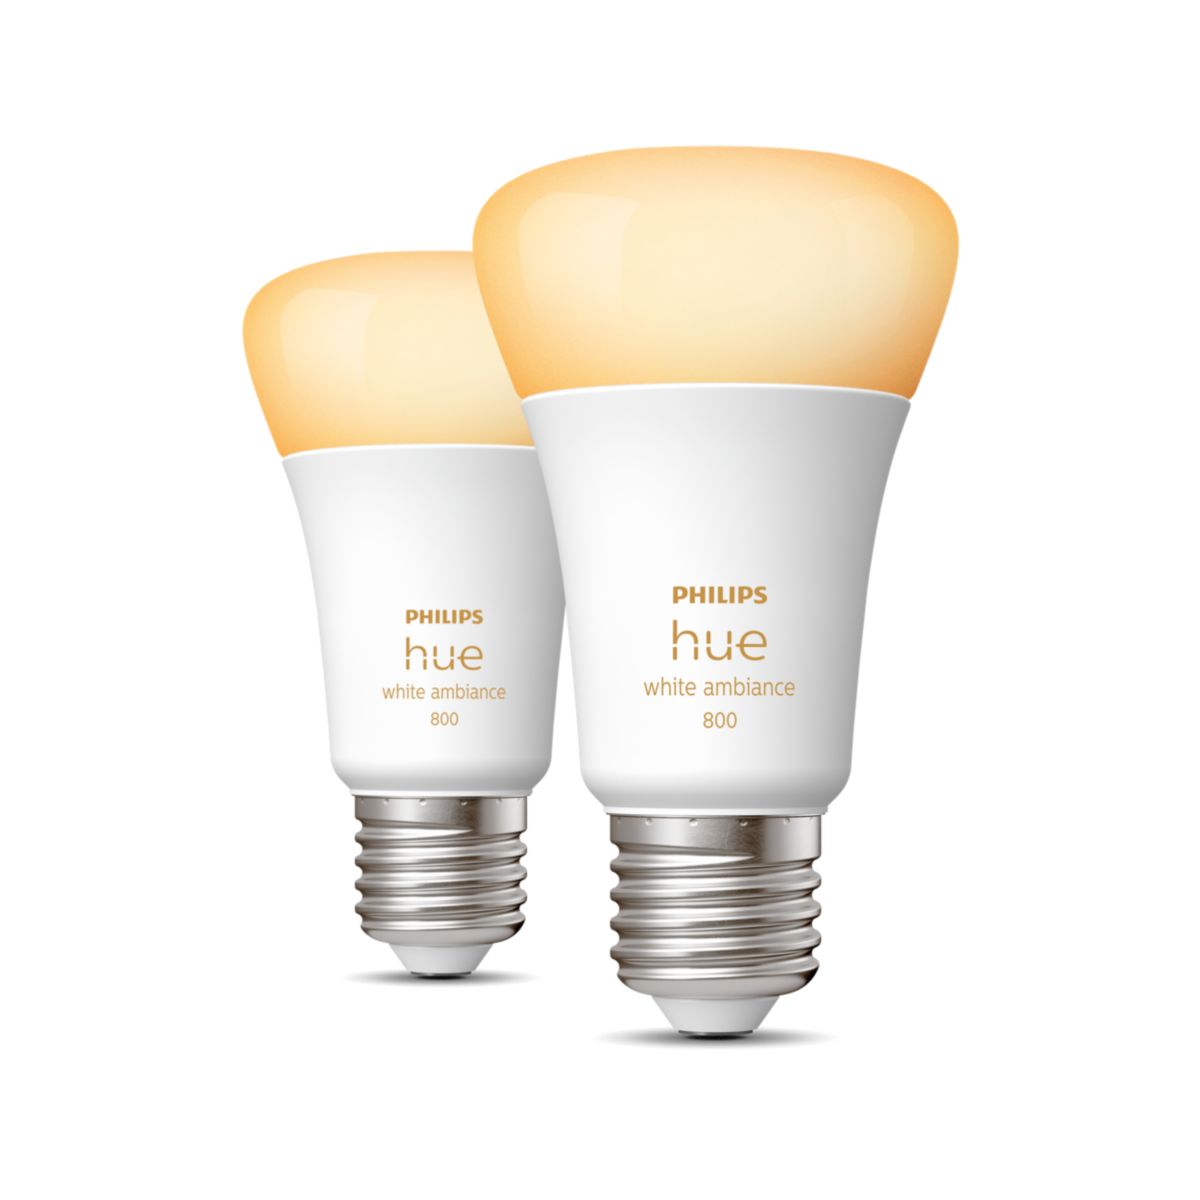 Philips Hue E27 white ambiance 800lm 2-pack